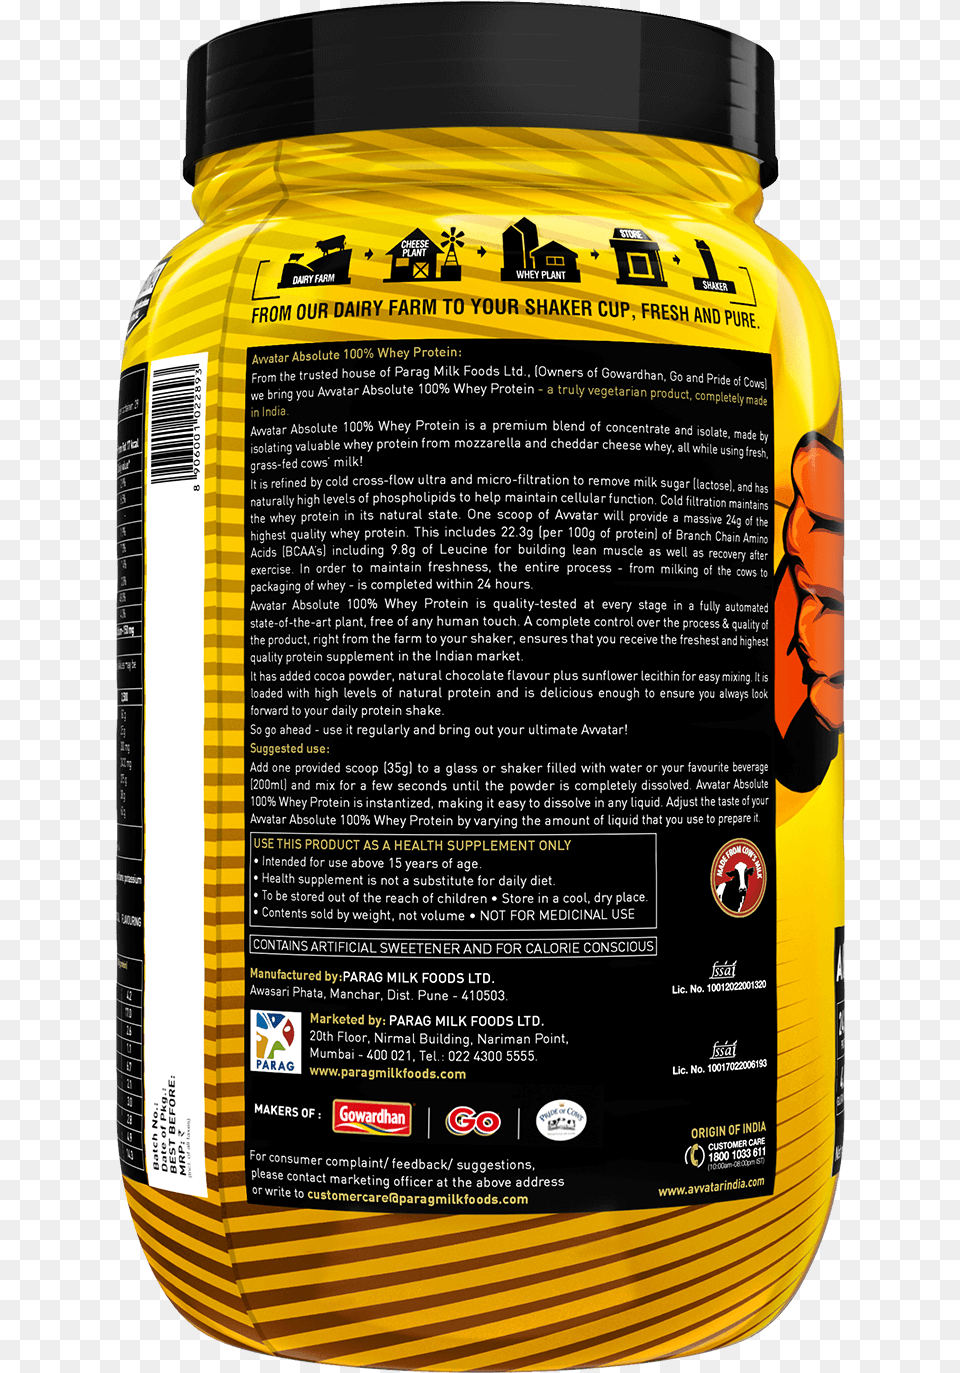 Avatar Whey Protein, Jar, Food, Mustard, Can Png Image